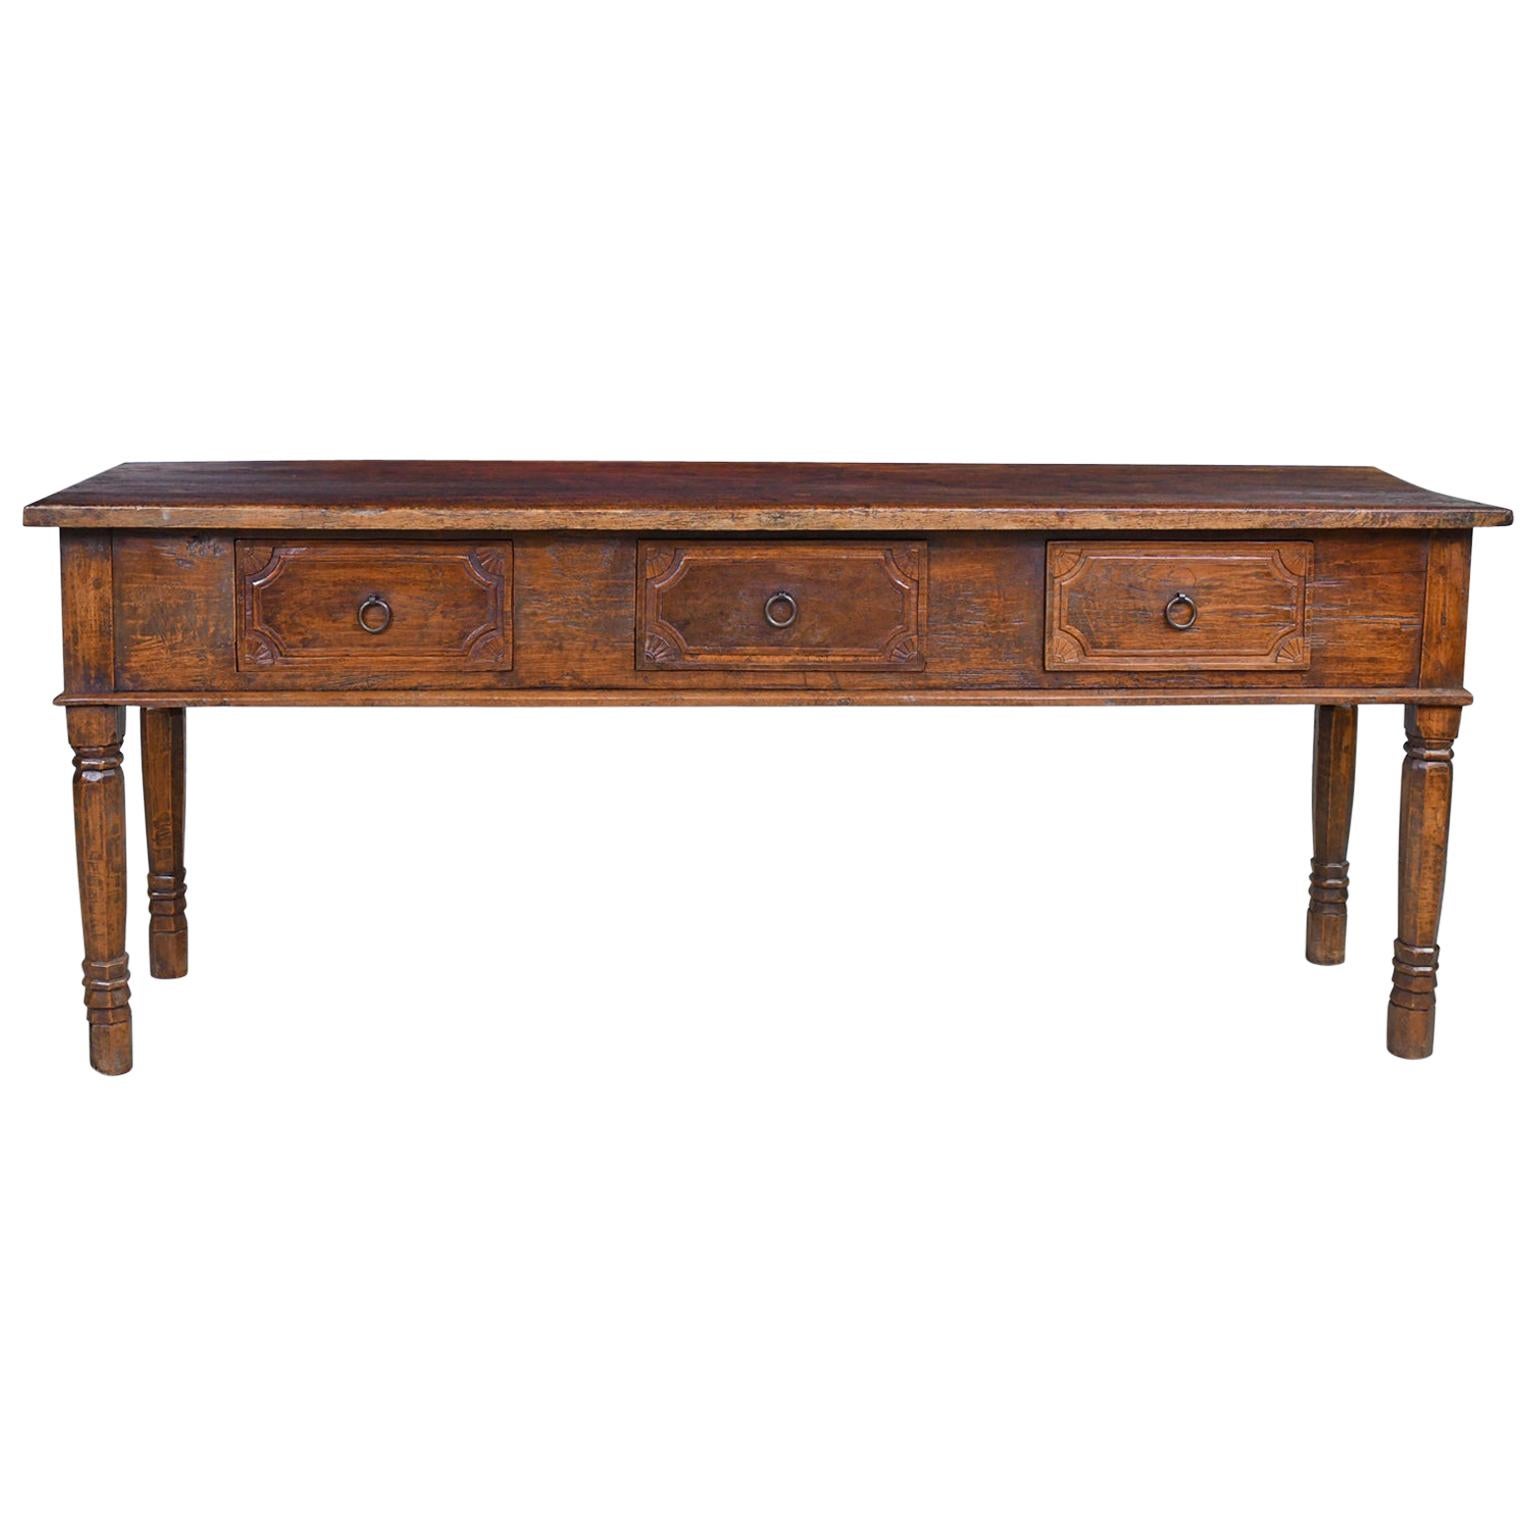 19th Century Dutch East Indies Farmhouse Table or Sideboard in Teak with Drawers